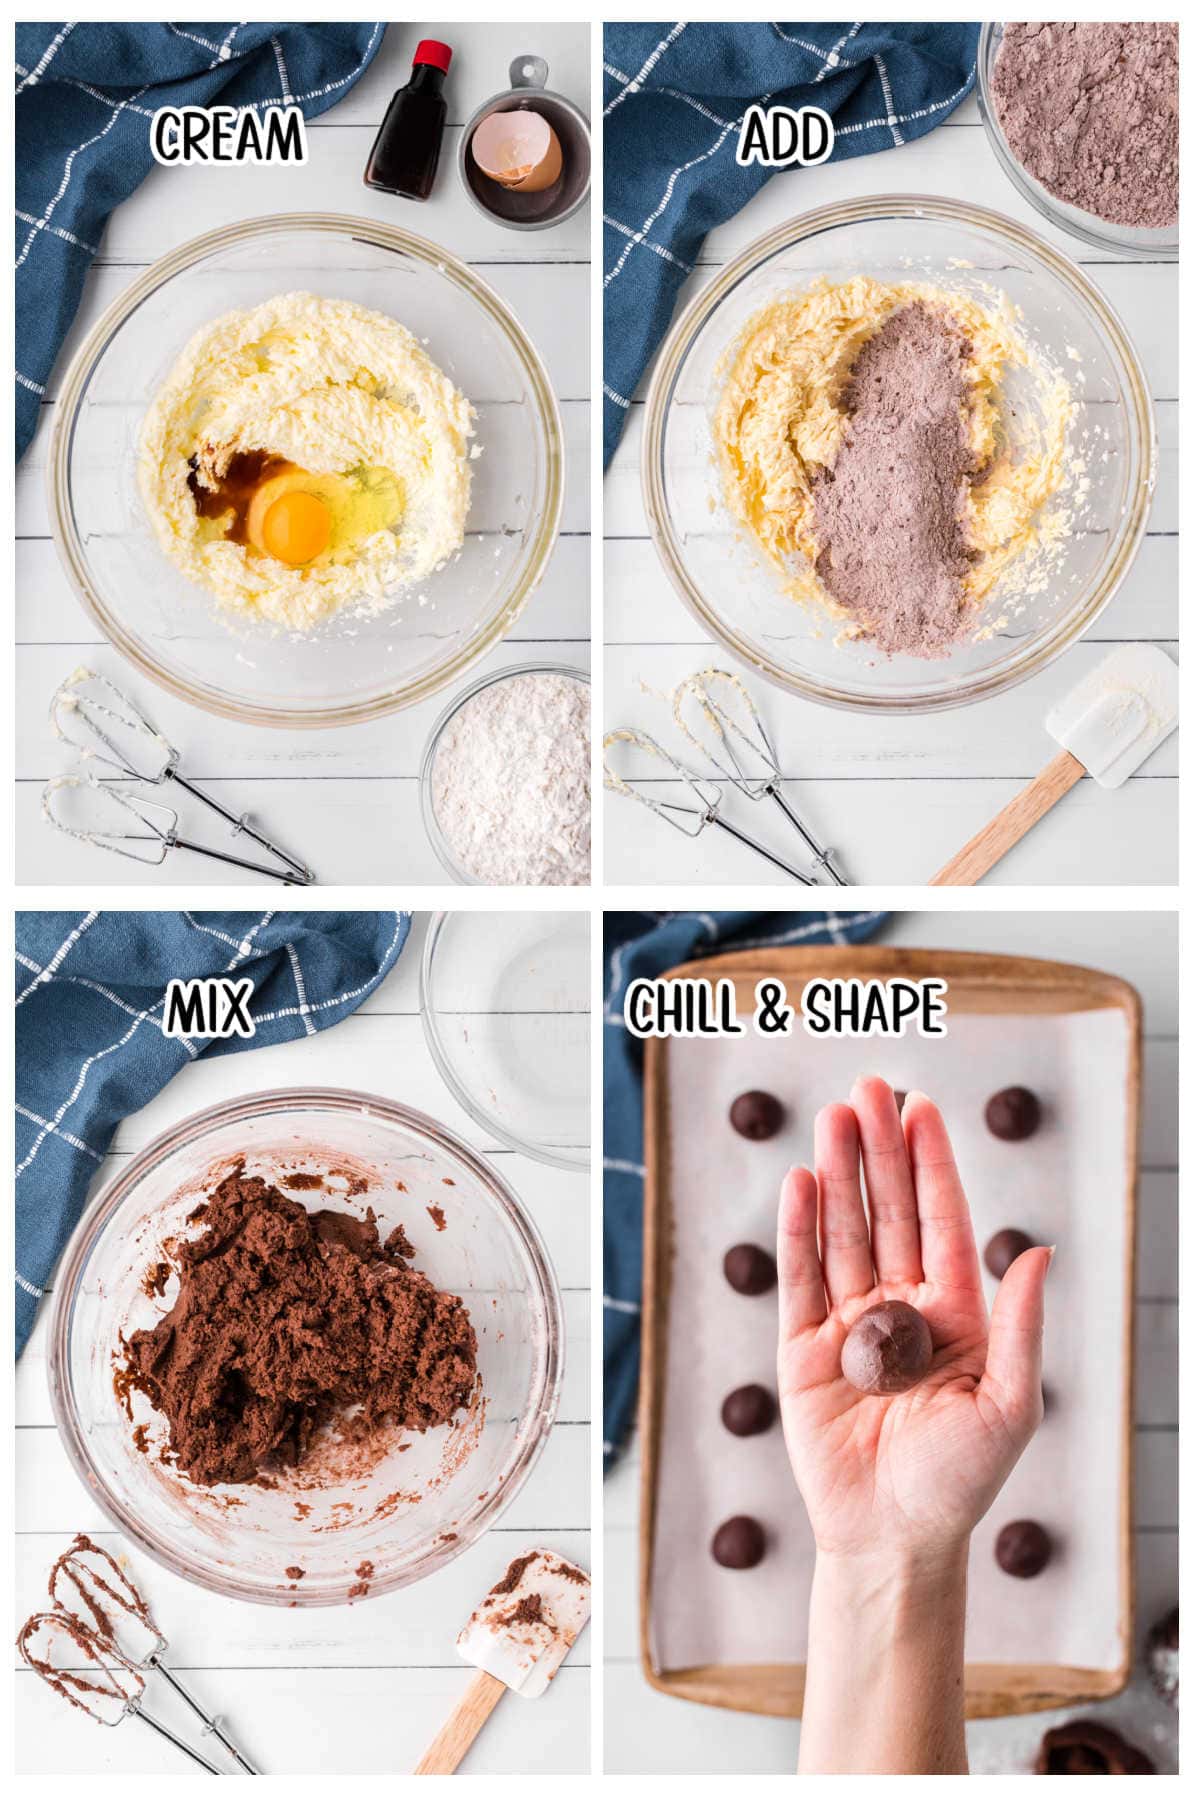 Step-by-step images showing how to make chocolate butter cookies.